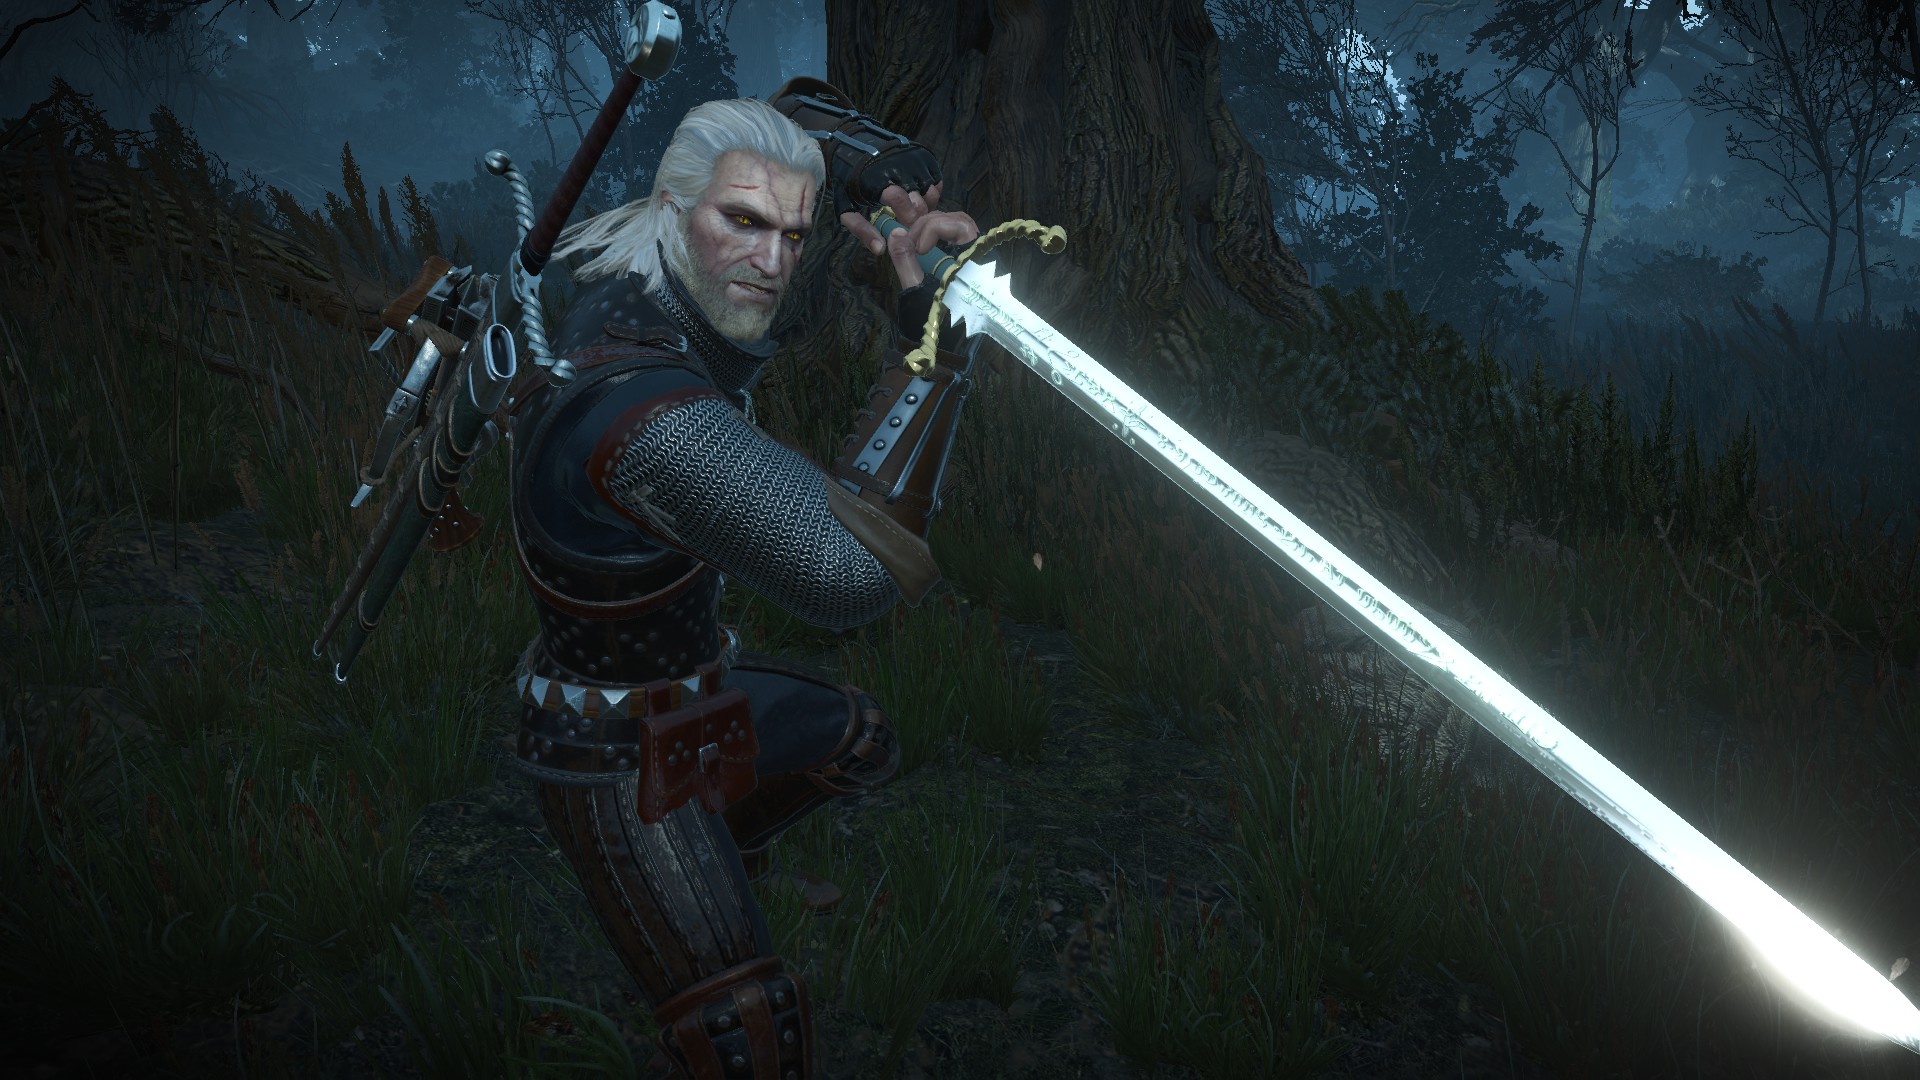 witcher 3 buy the sword from the looter